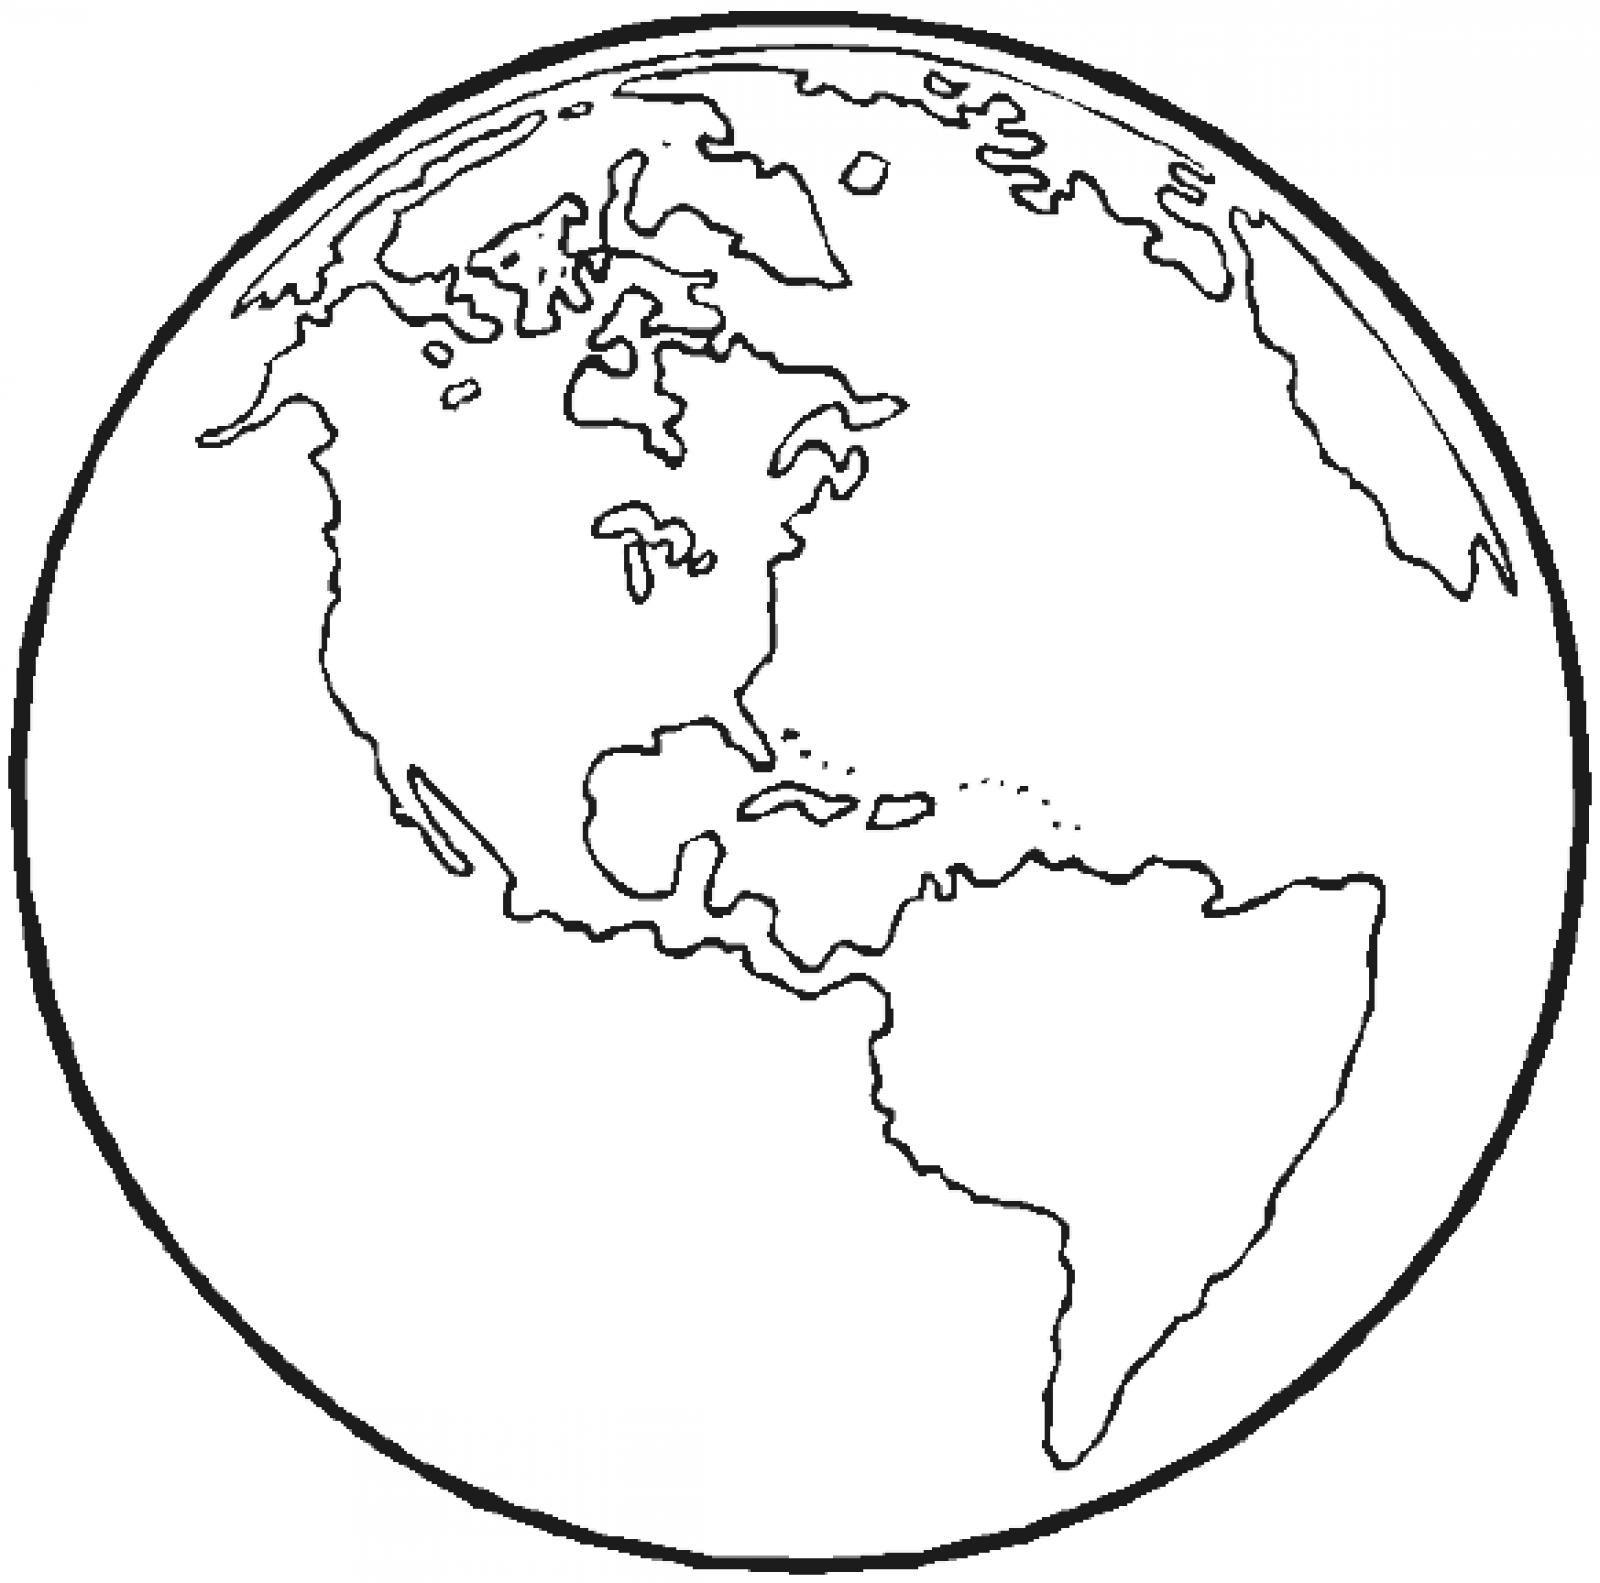 Earth from space printable coloring pages extra coloring page space coloring pages coloring pages earth coloring pages